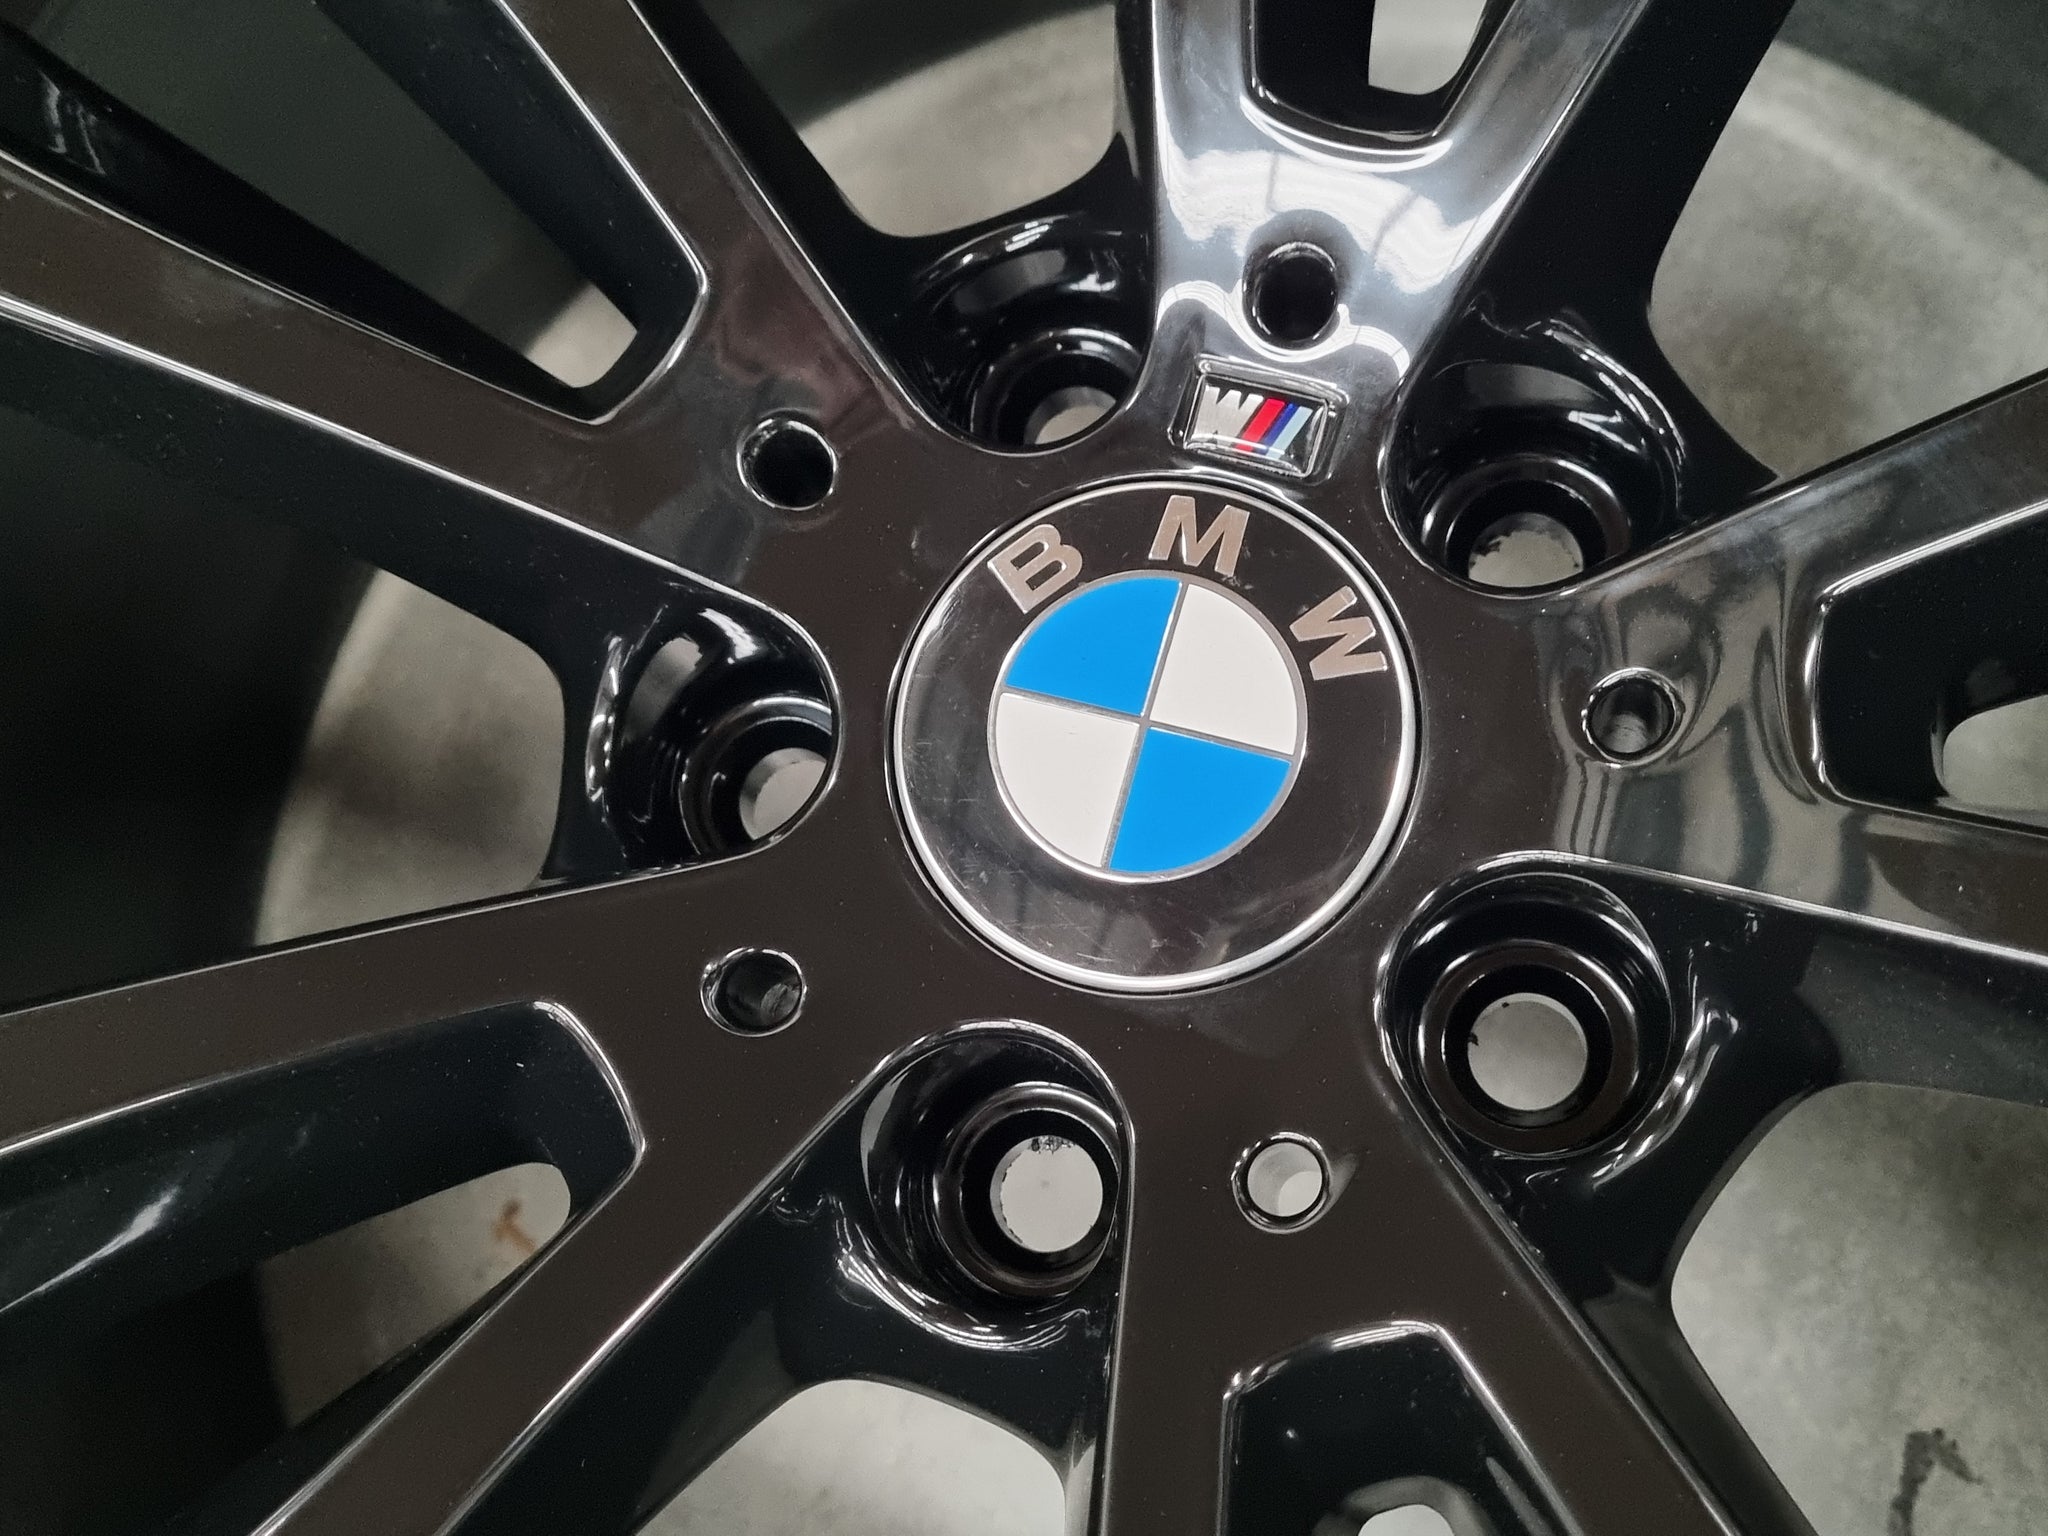 Load image into Gallery viewer, Genuine BMW X5 F15 Style 469M Sport Black 20 Inch Wheels Set of 4
